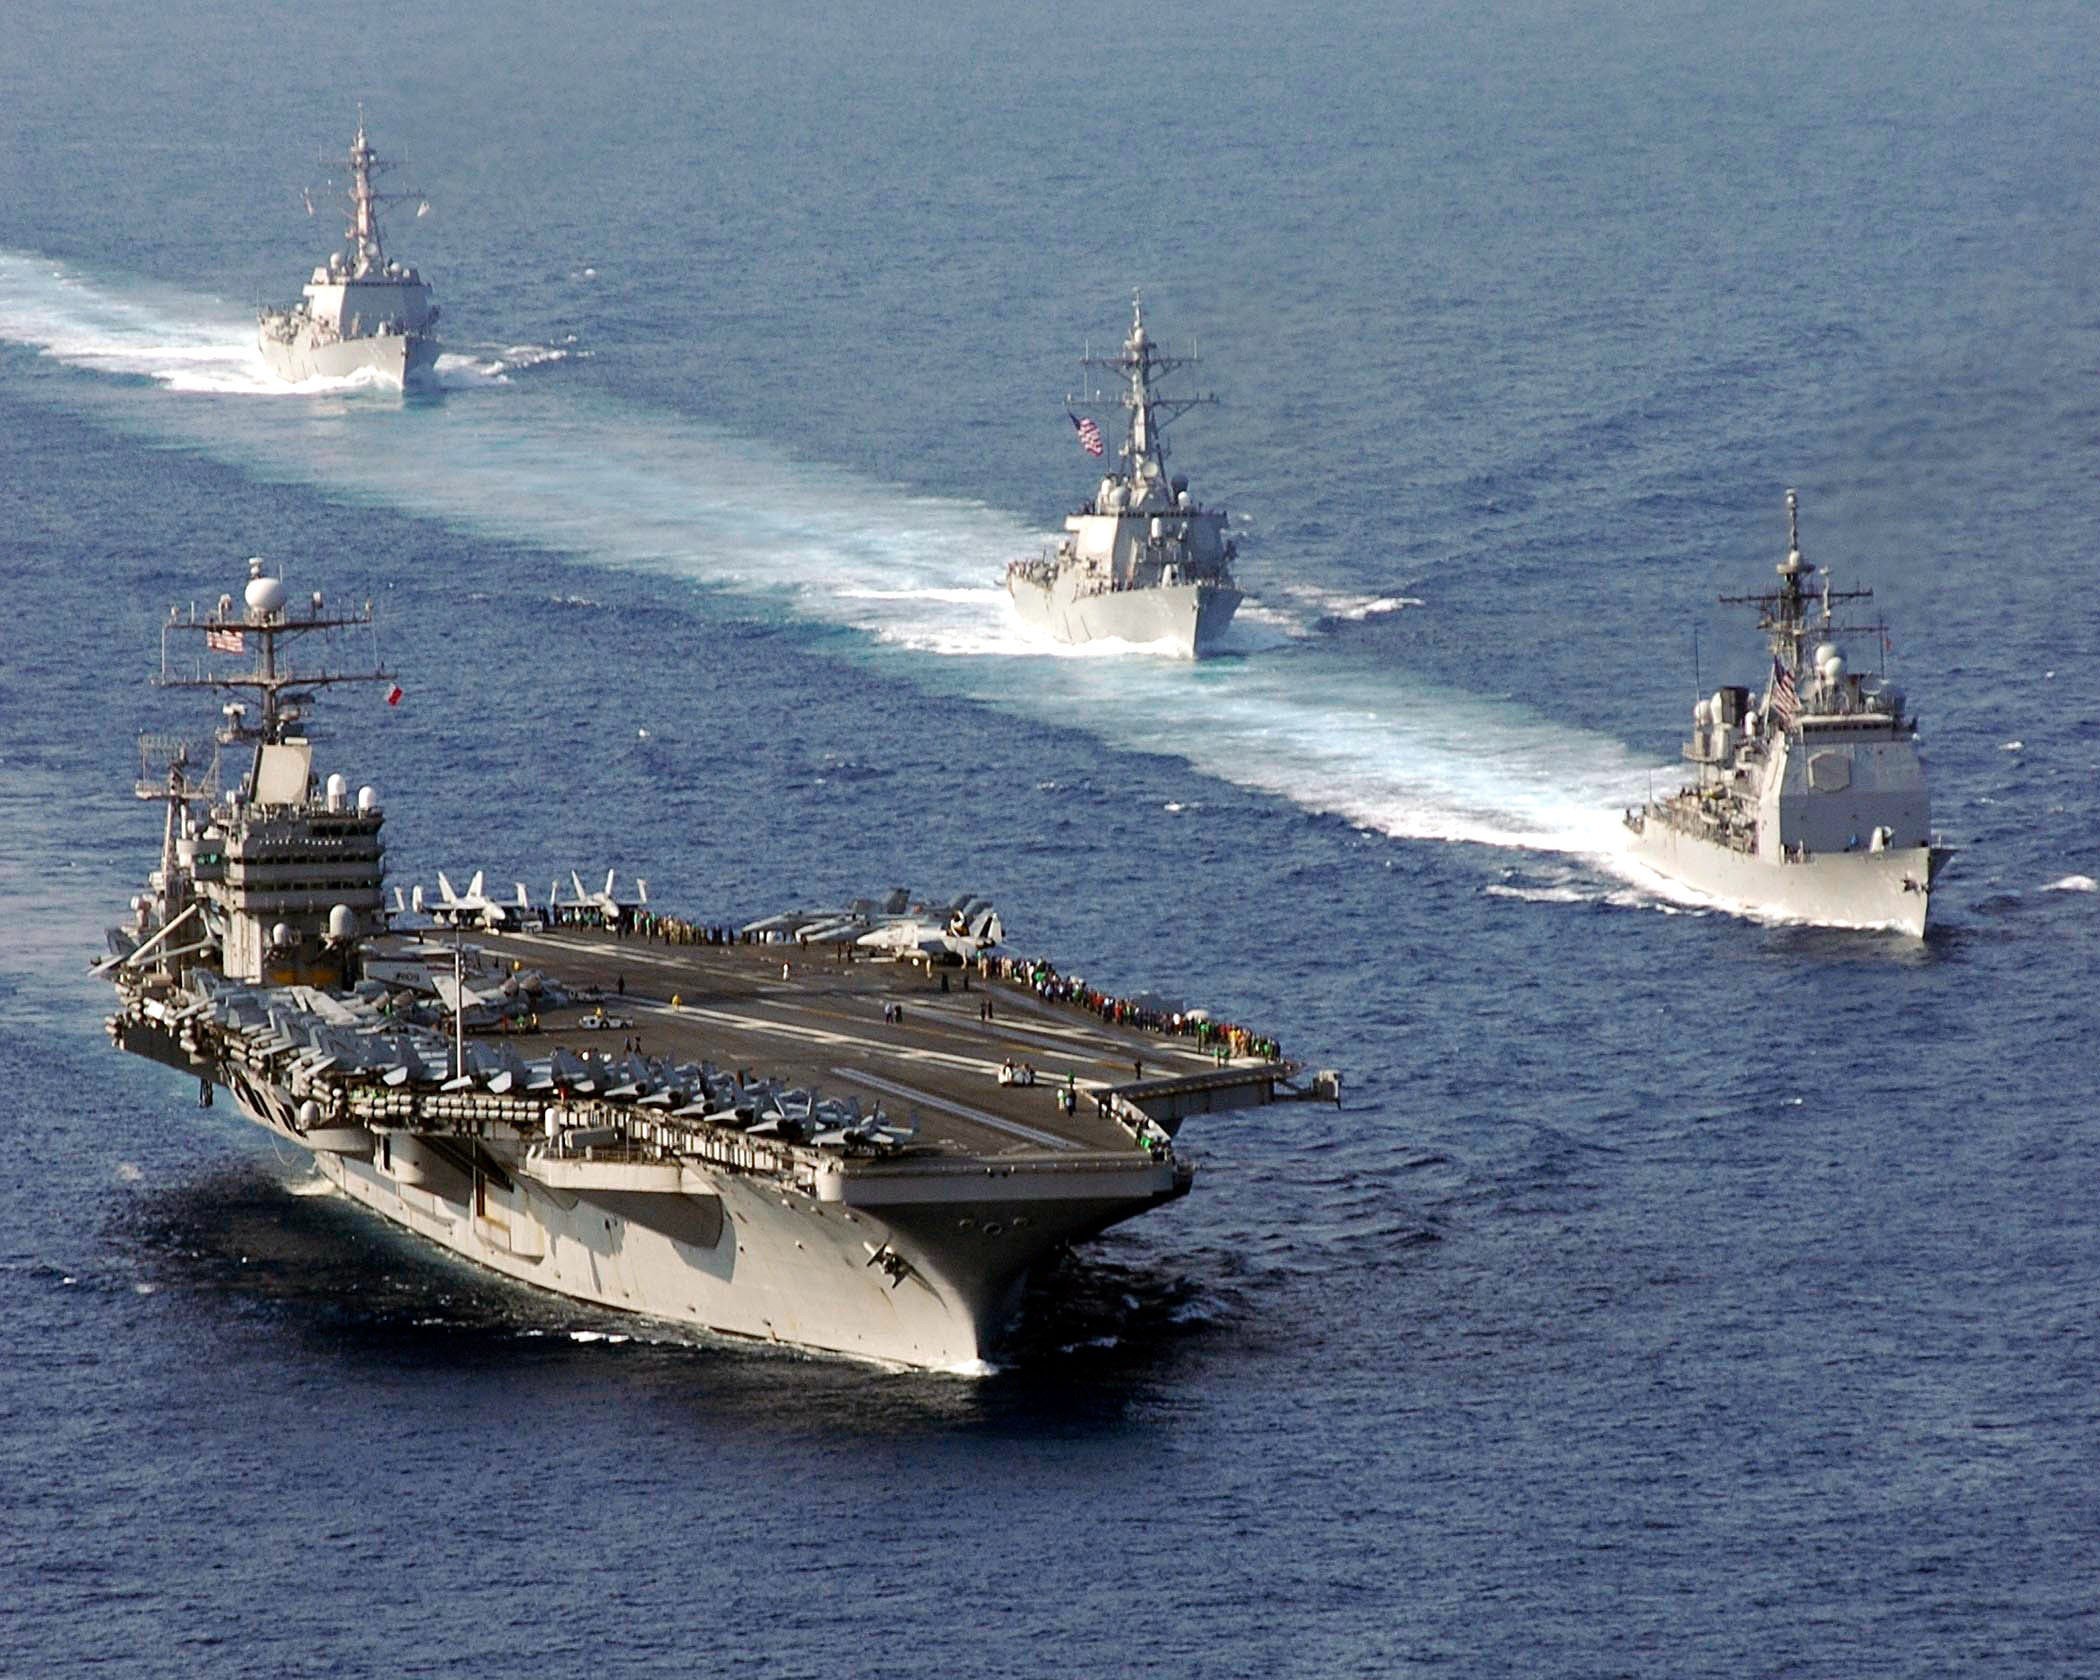 A file photo shows the aircraft carrier USS Abraham Lincoln and its support fleet. The carrier is headed to the Florida Keys as part of relief efforts. Photo: US Navy